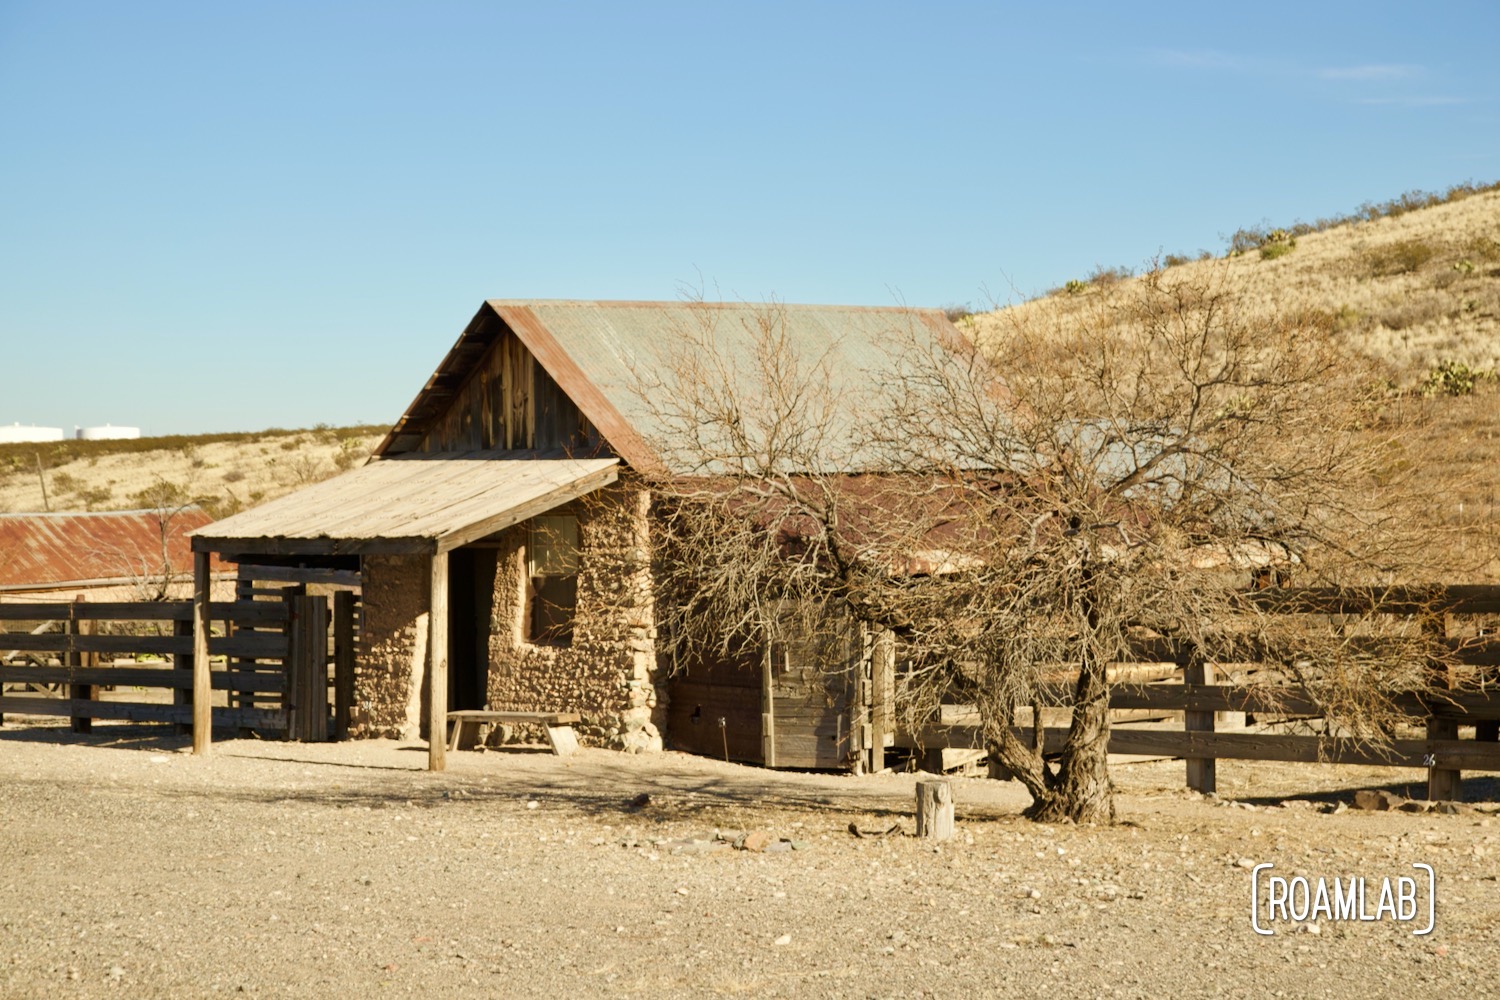 Old homestead on a dry grassy hill in Shakespeare Ghost Town, New Mexico.